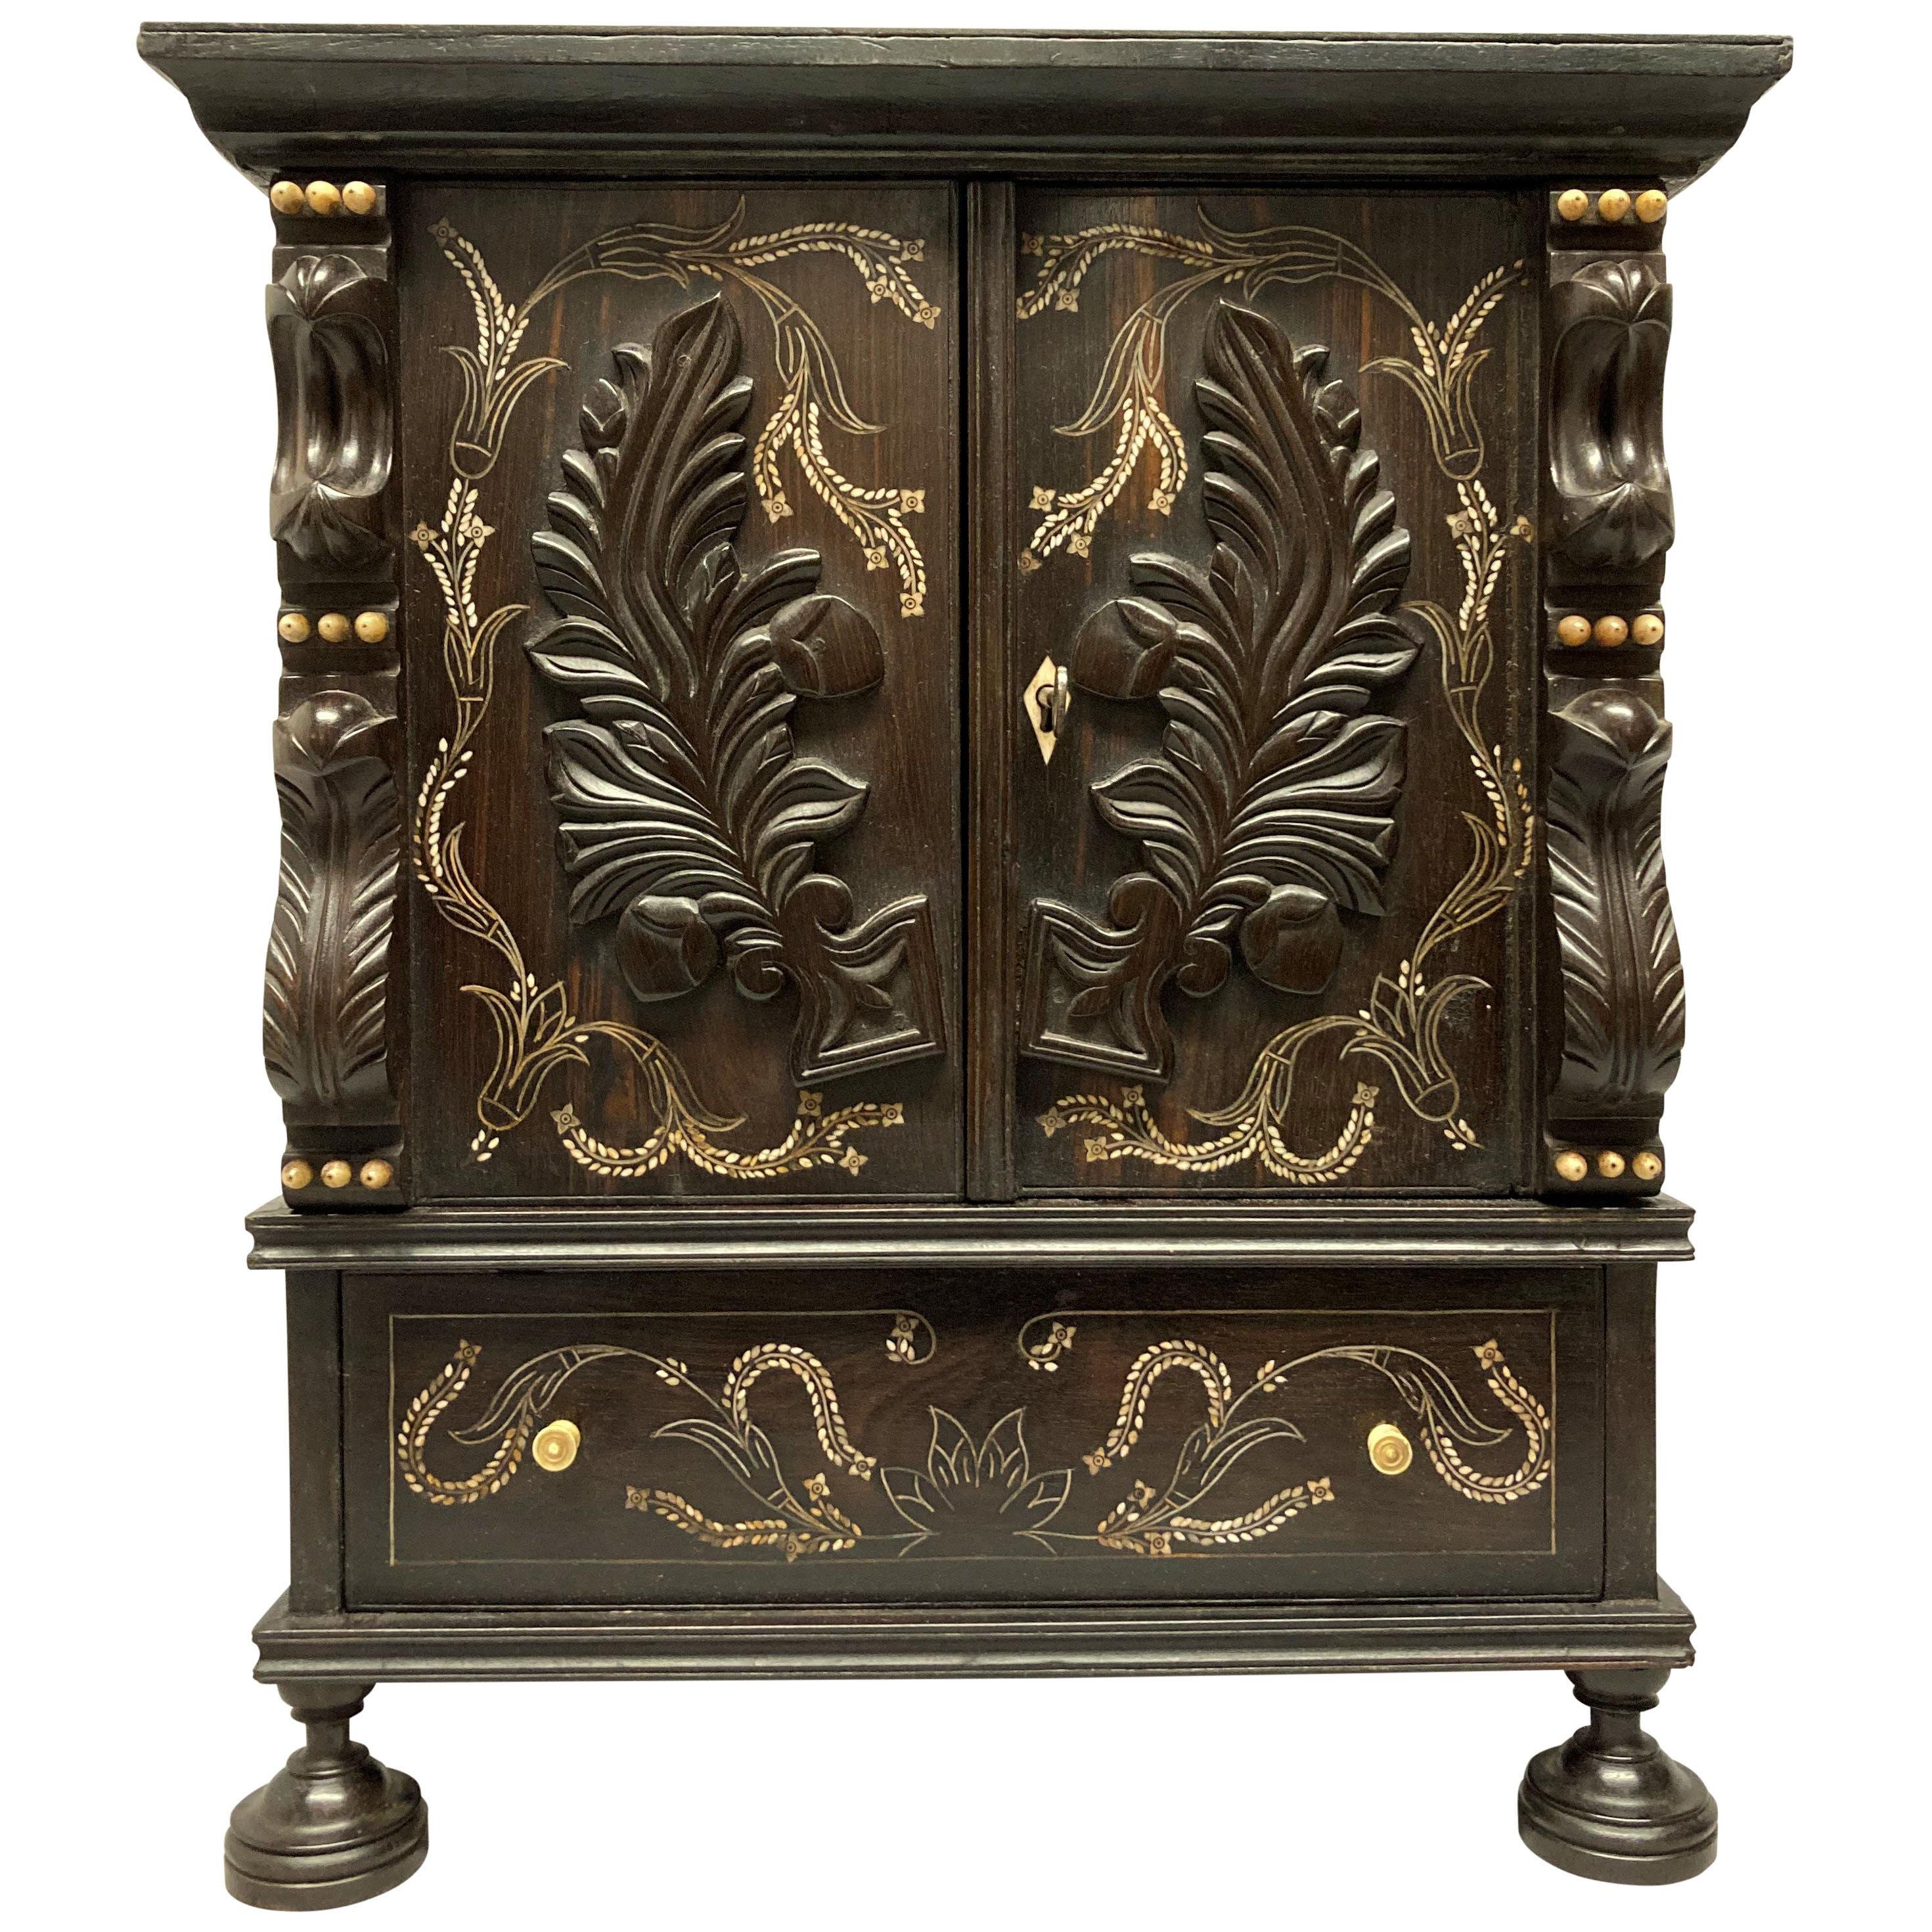 AN EARLY XIX CENTURY ANGLO-INDIAN CABINET IN EBONY